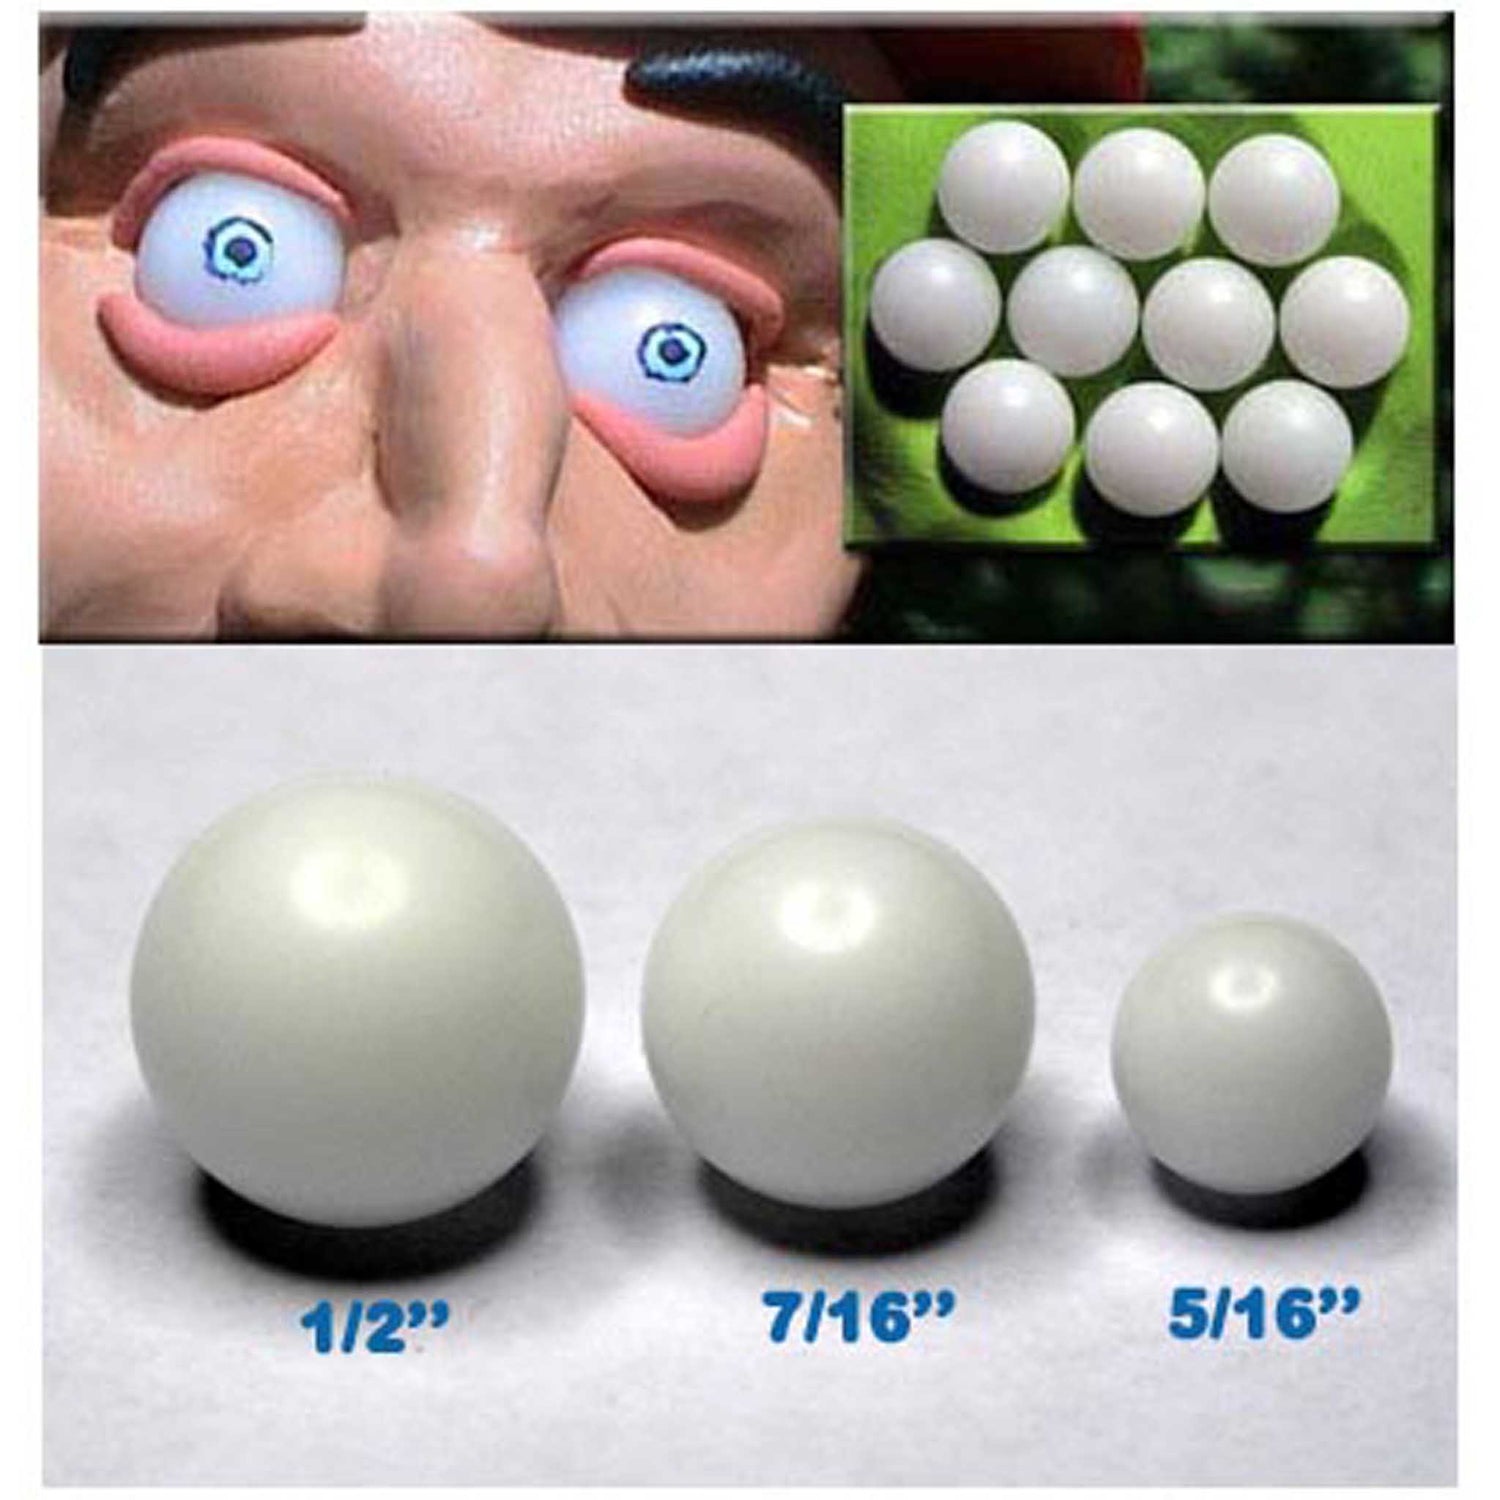 Delrin Balls in 1/2", 7/16" and 5/16" in Diameter